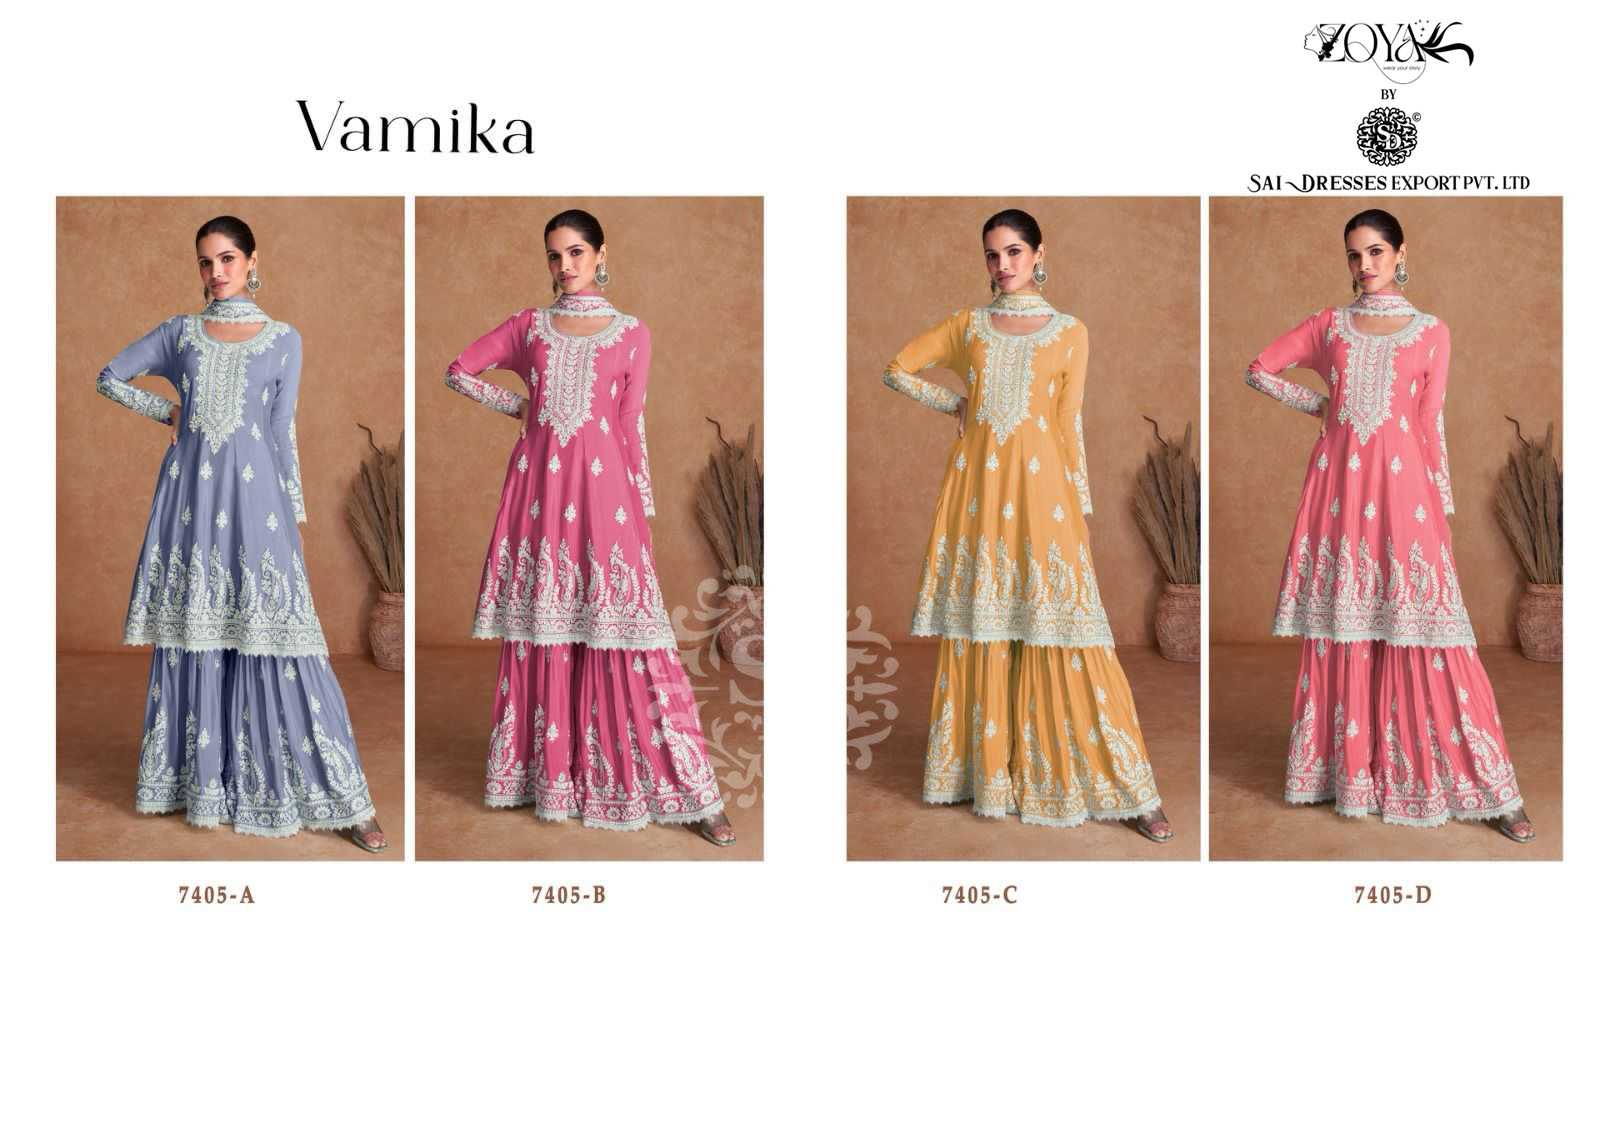 SAI DRESSES PRESENT VAMIKA READYMADE EXCLUSIVE WEAR PEPLUM WITH SHARARA STYLE DESIGNER SUITS IN WHOLESALE RATE IN SURAT